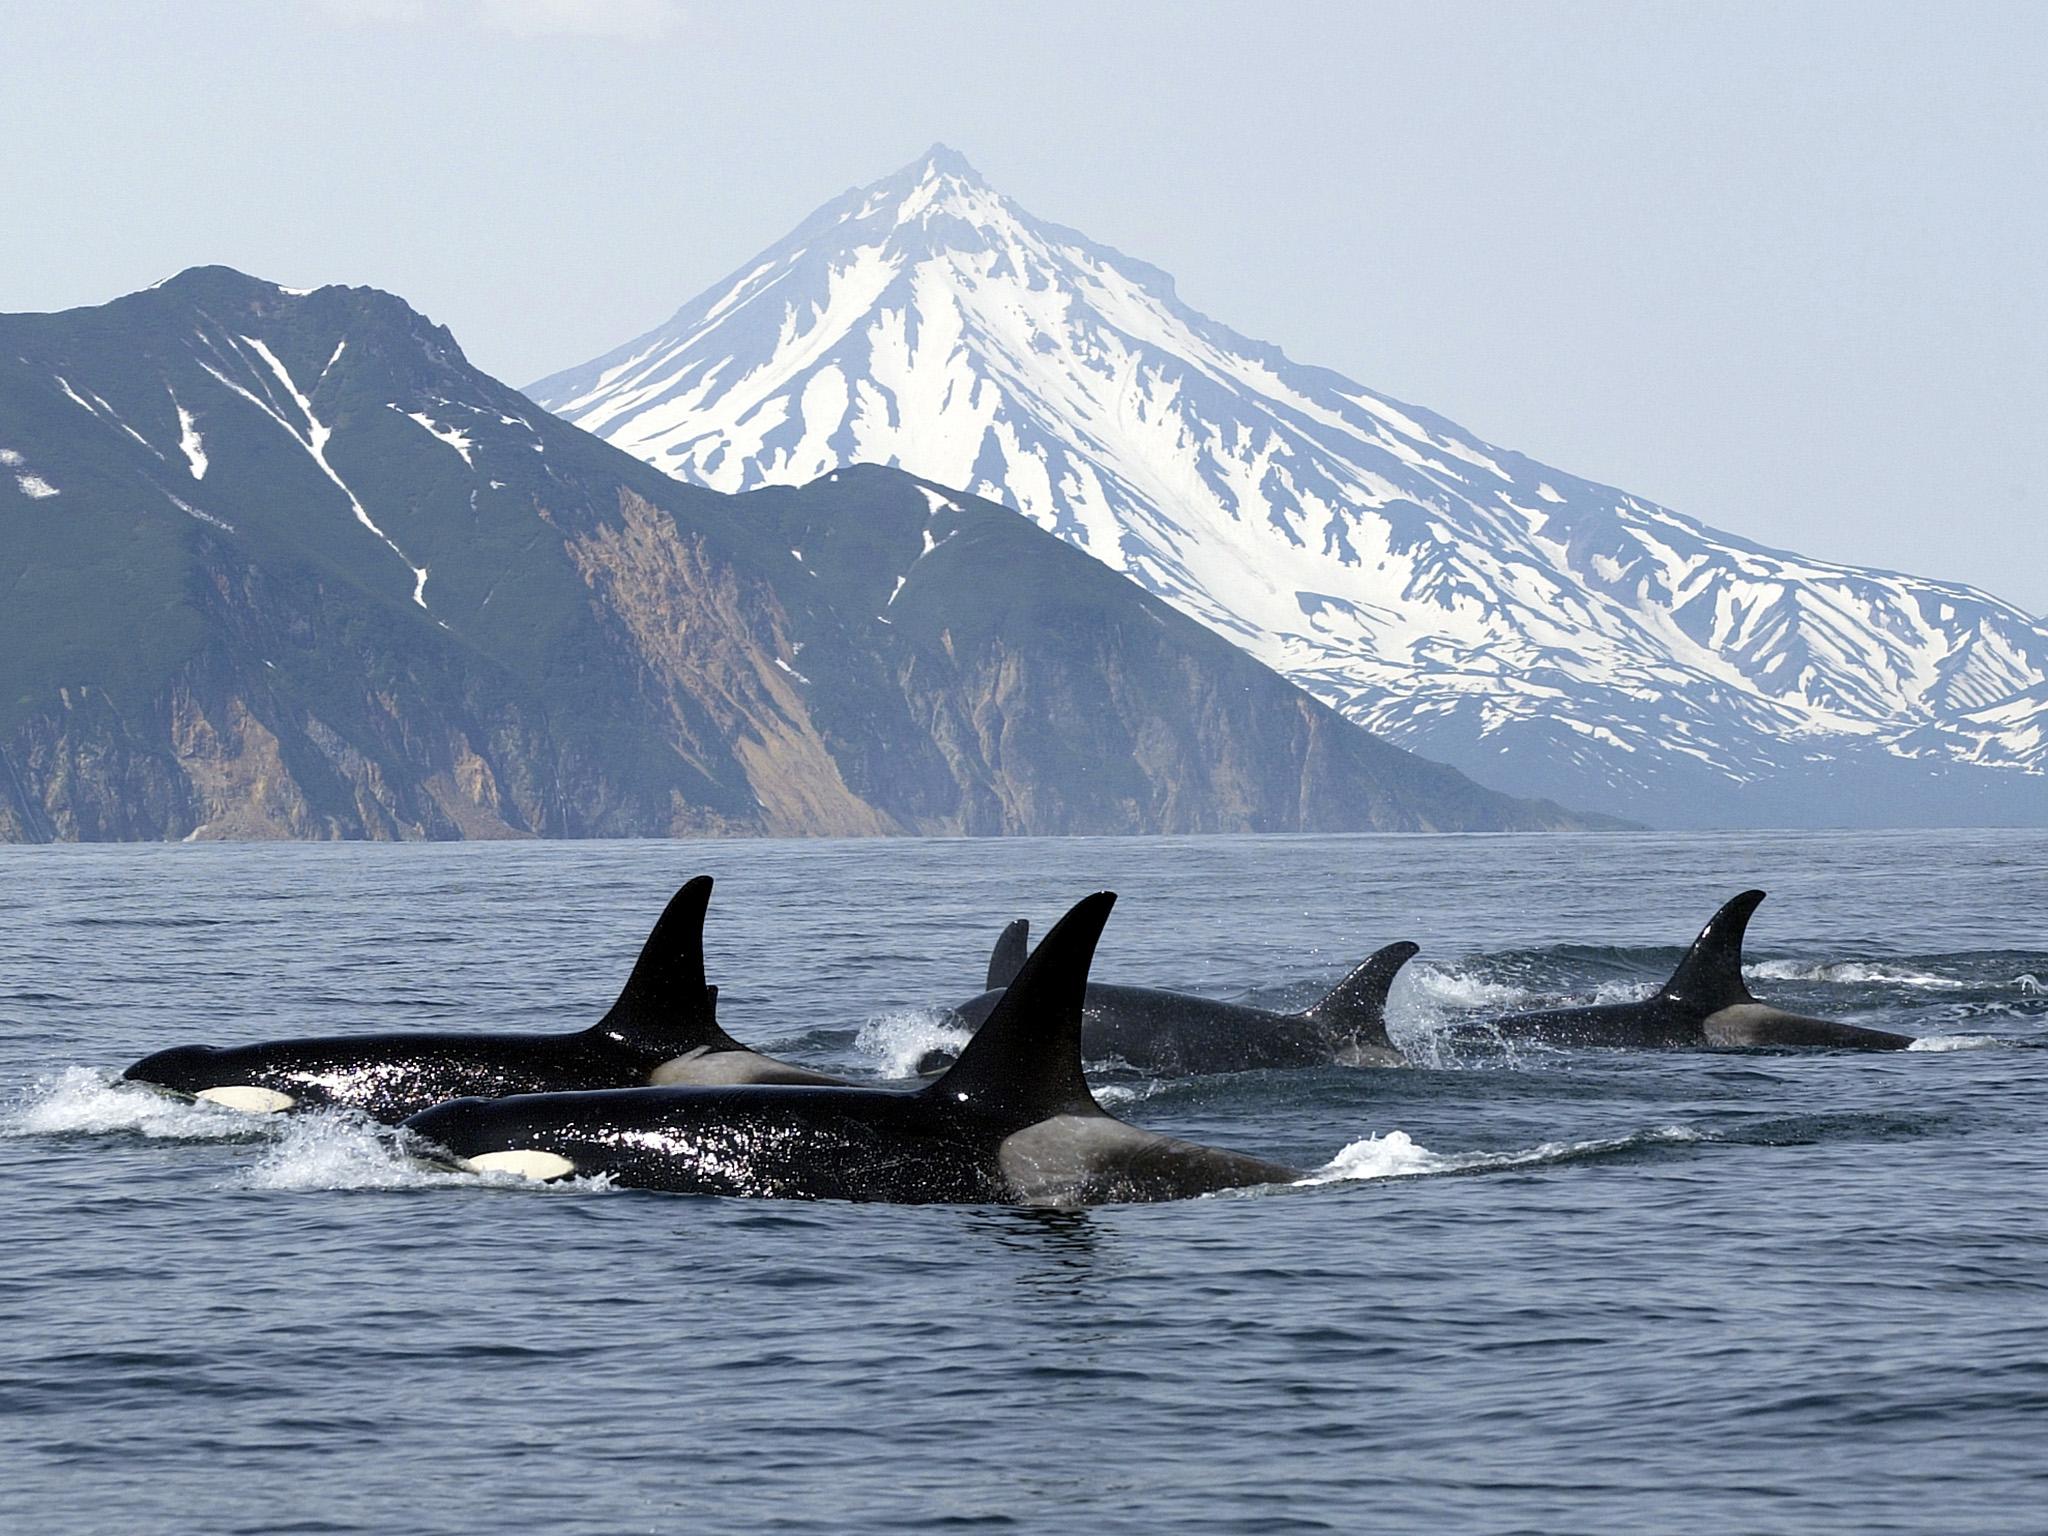 Killer whales tend to travel in packs of seven or more